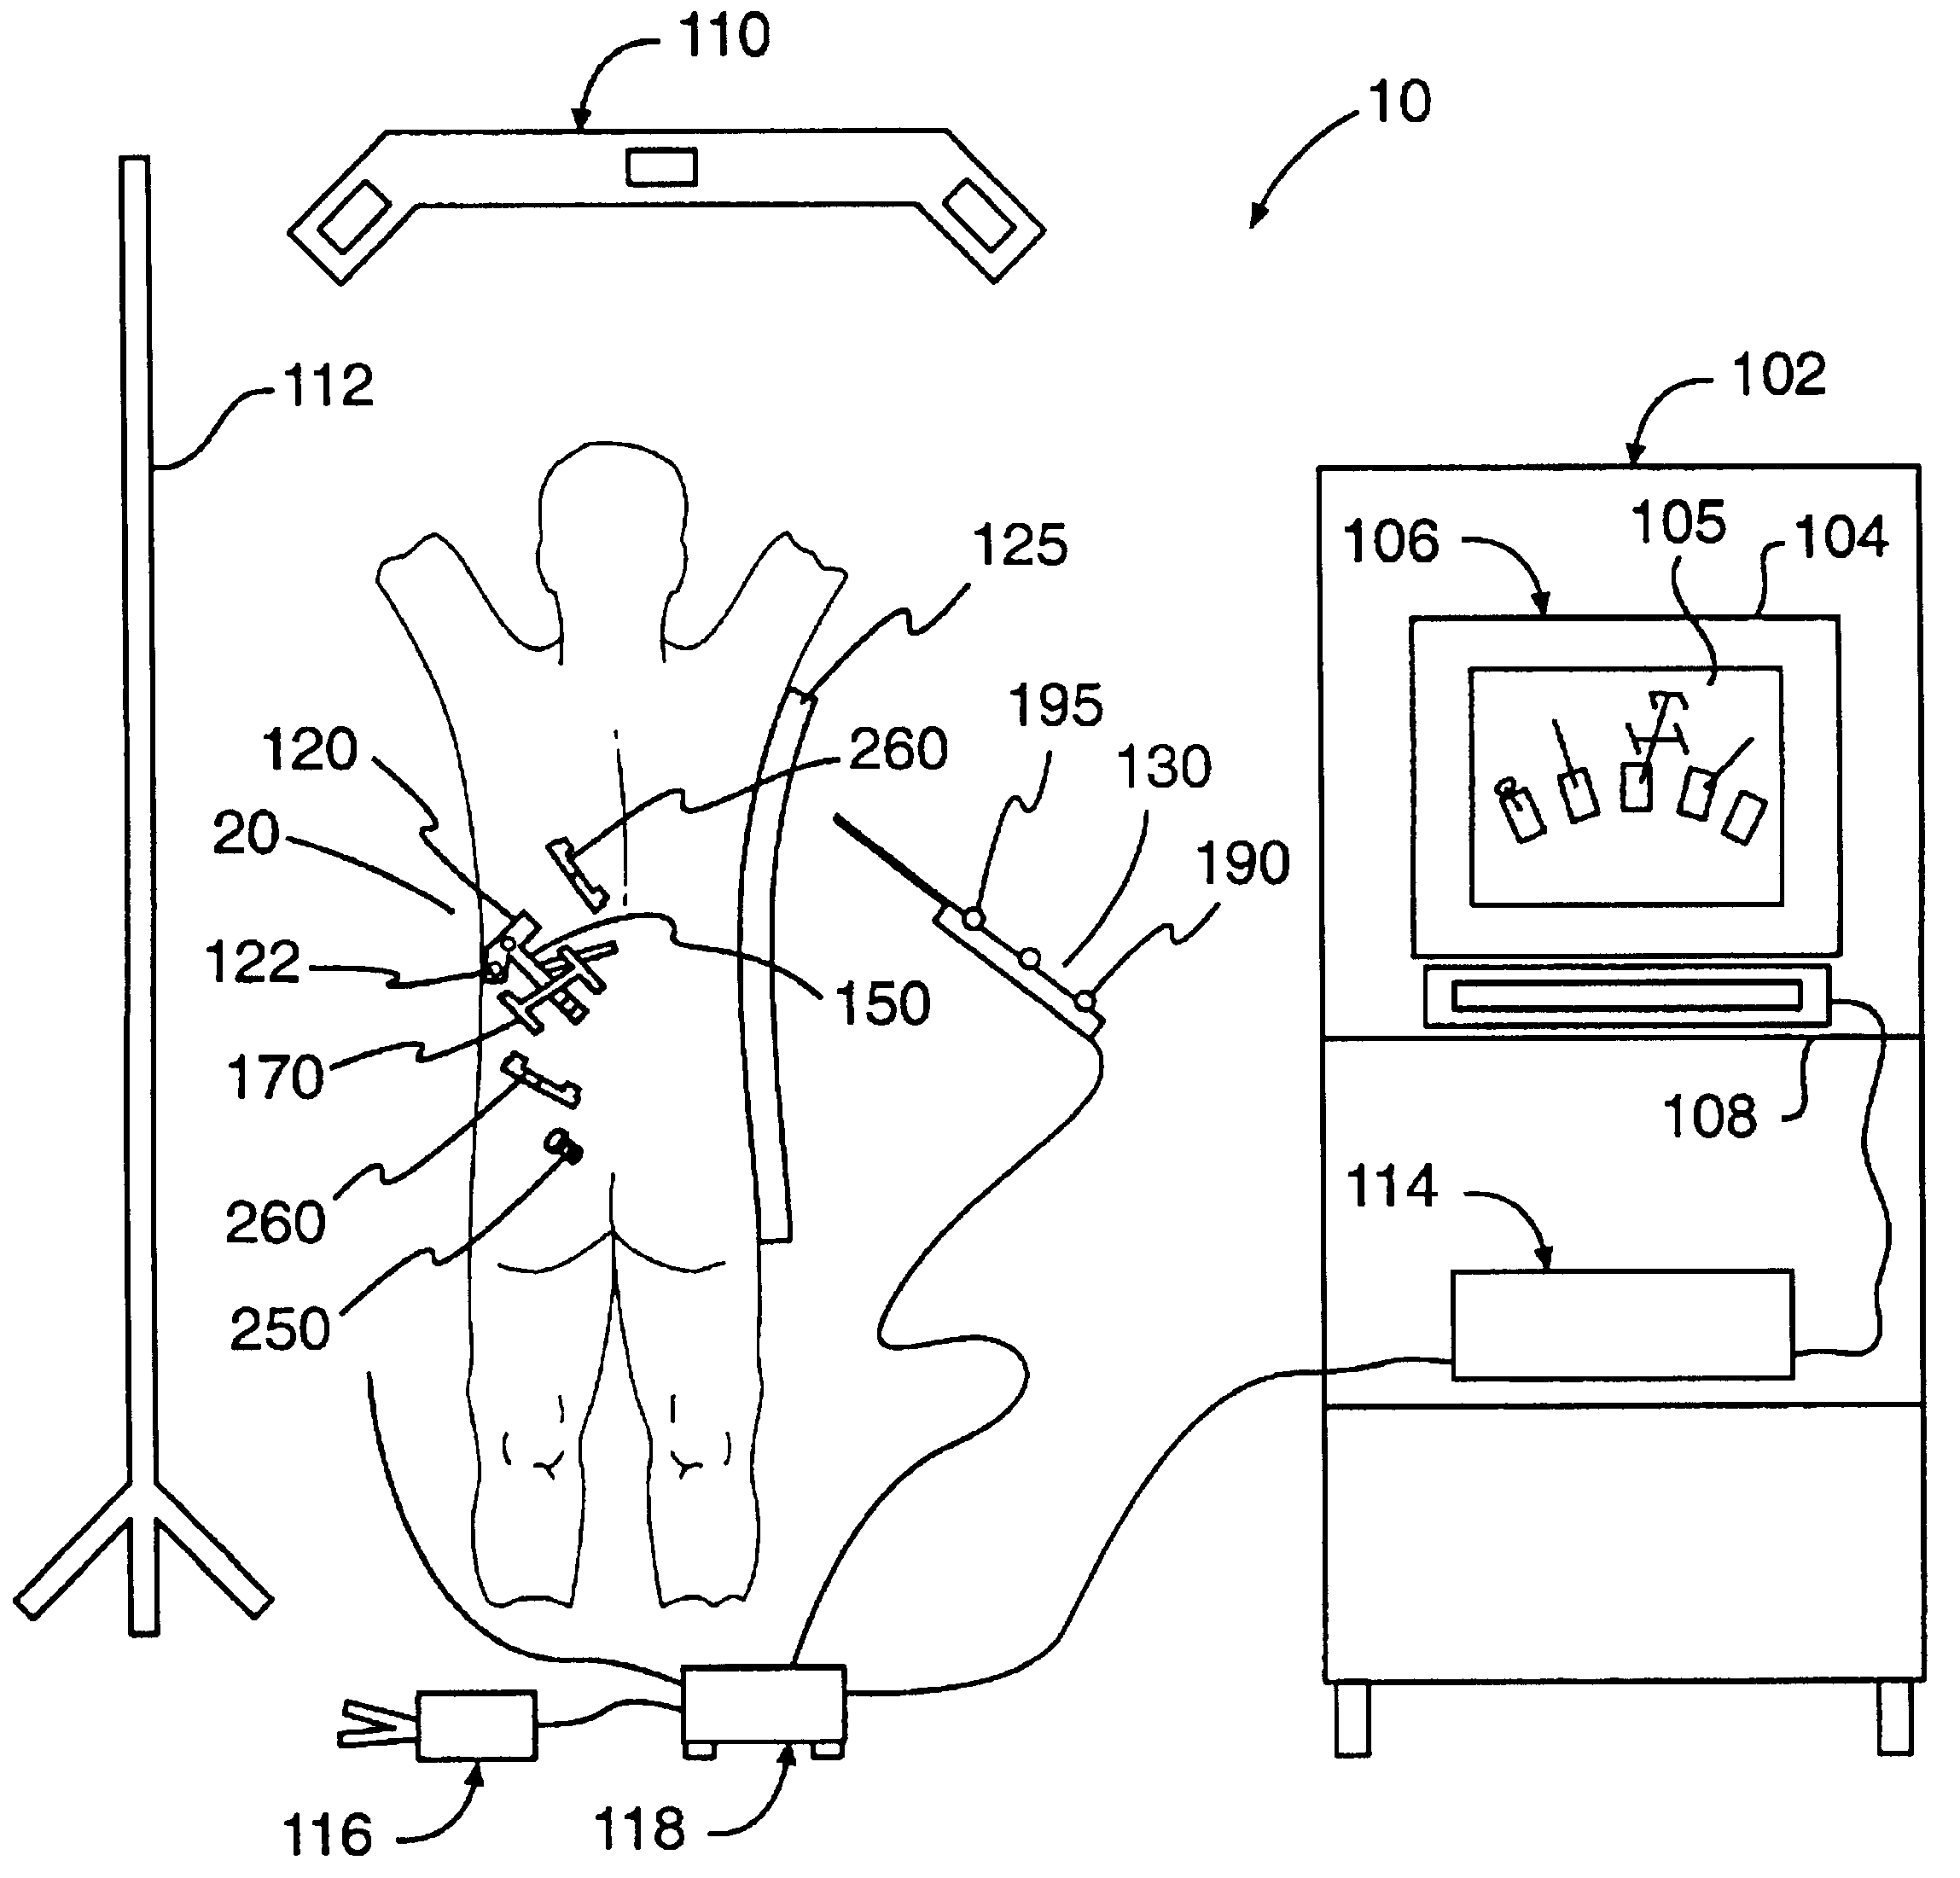 Percutaneous registration apparatus and method for use in computer-assisted surgical navigation